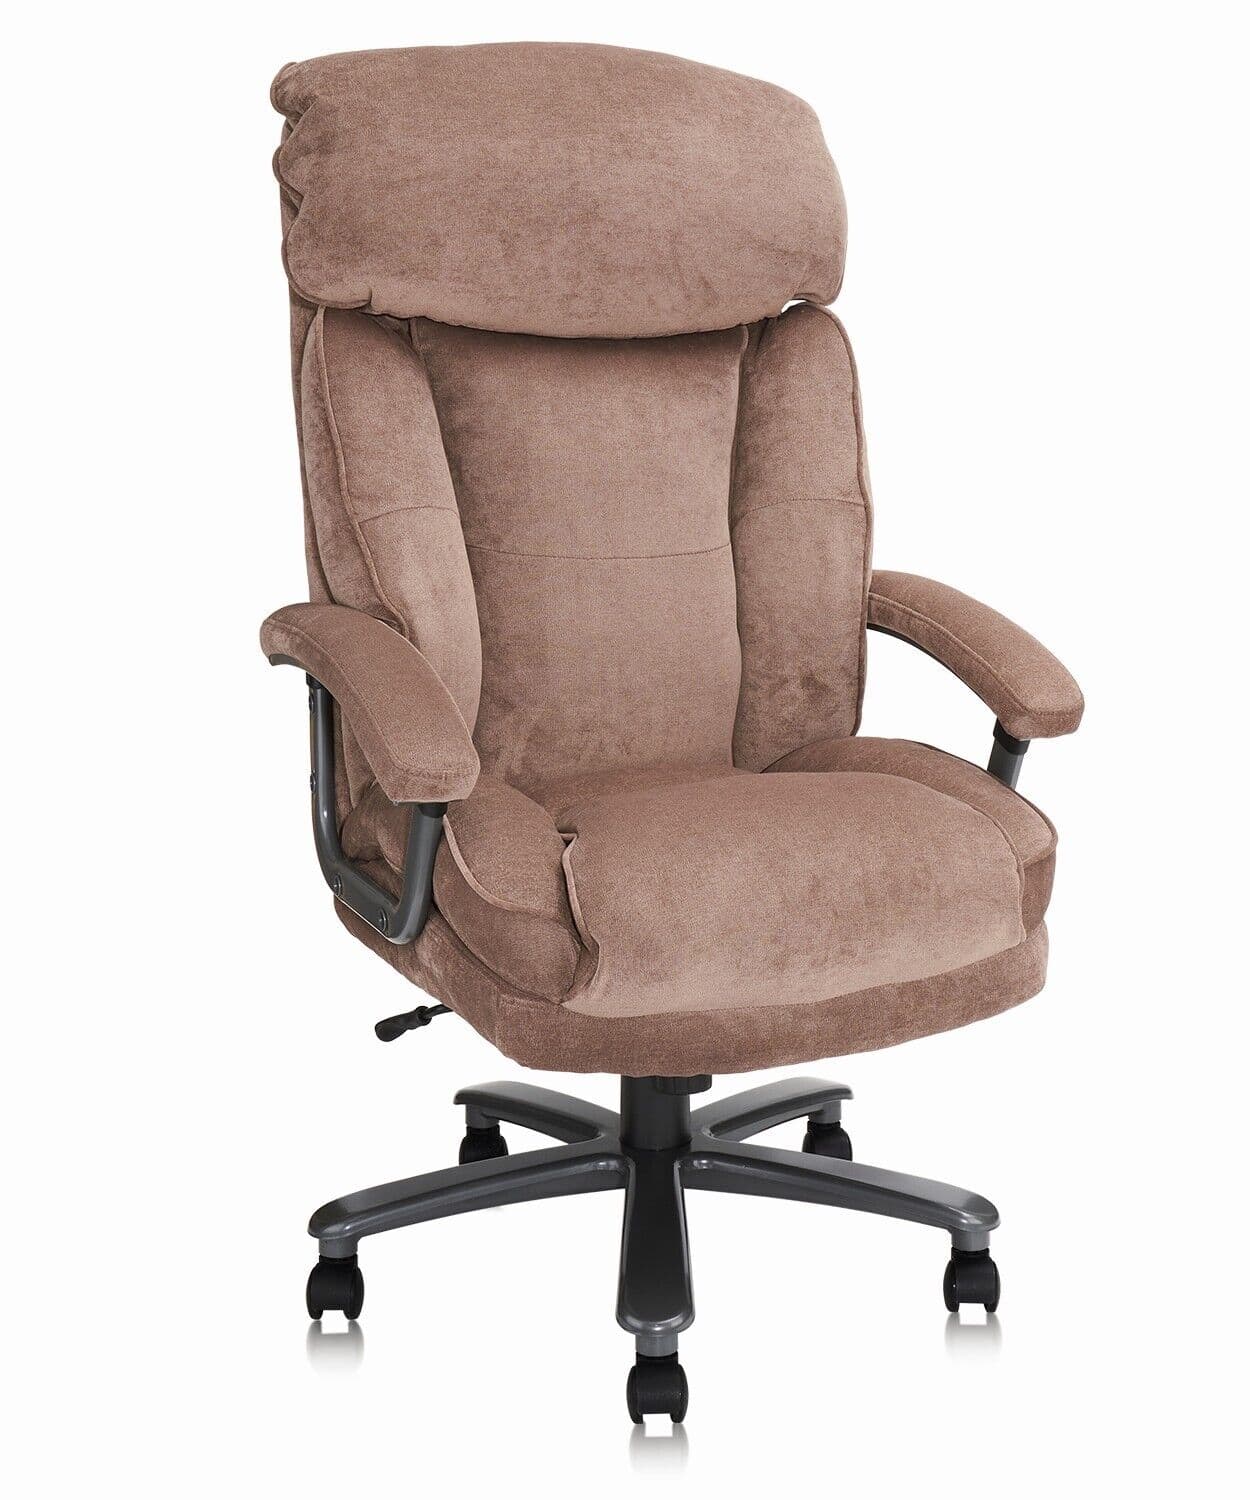 A brown office chair on a white background.